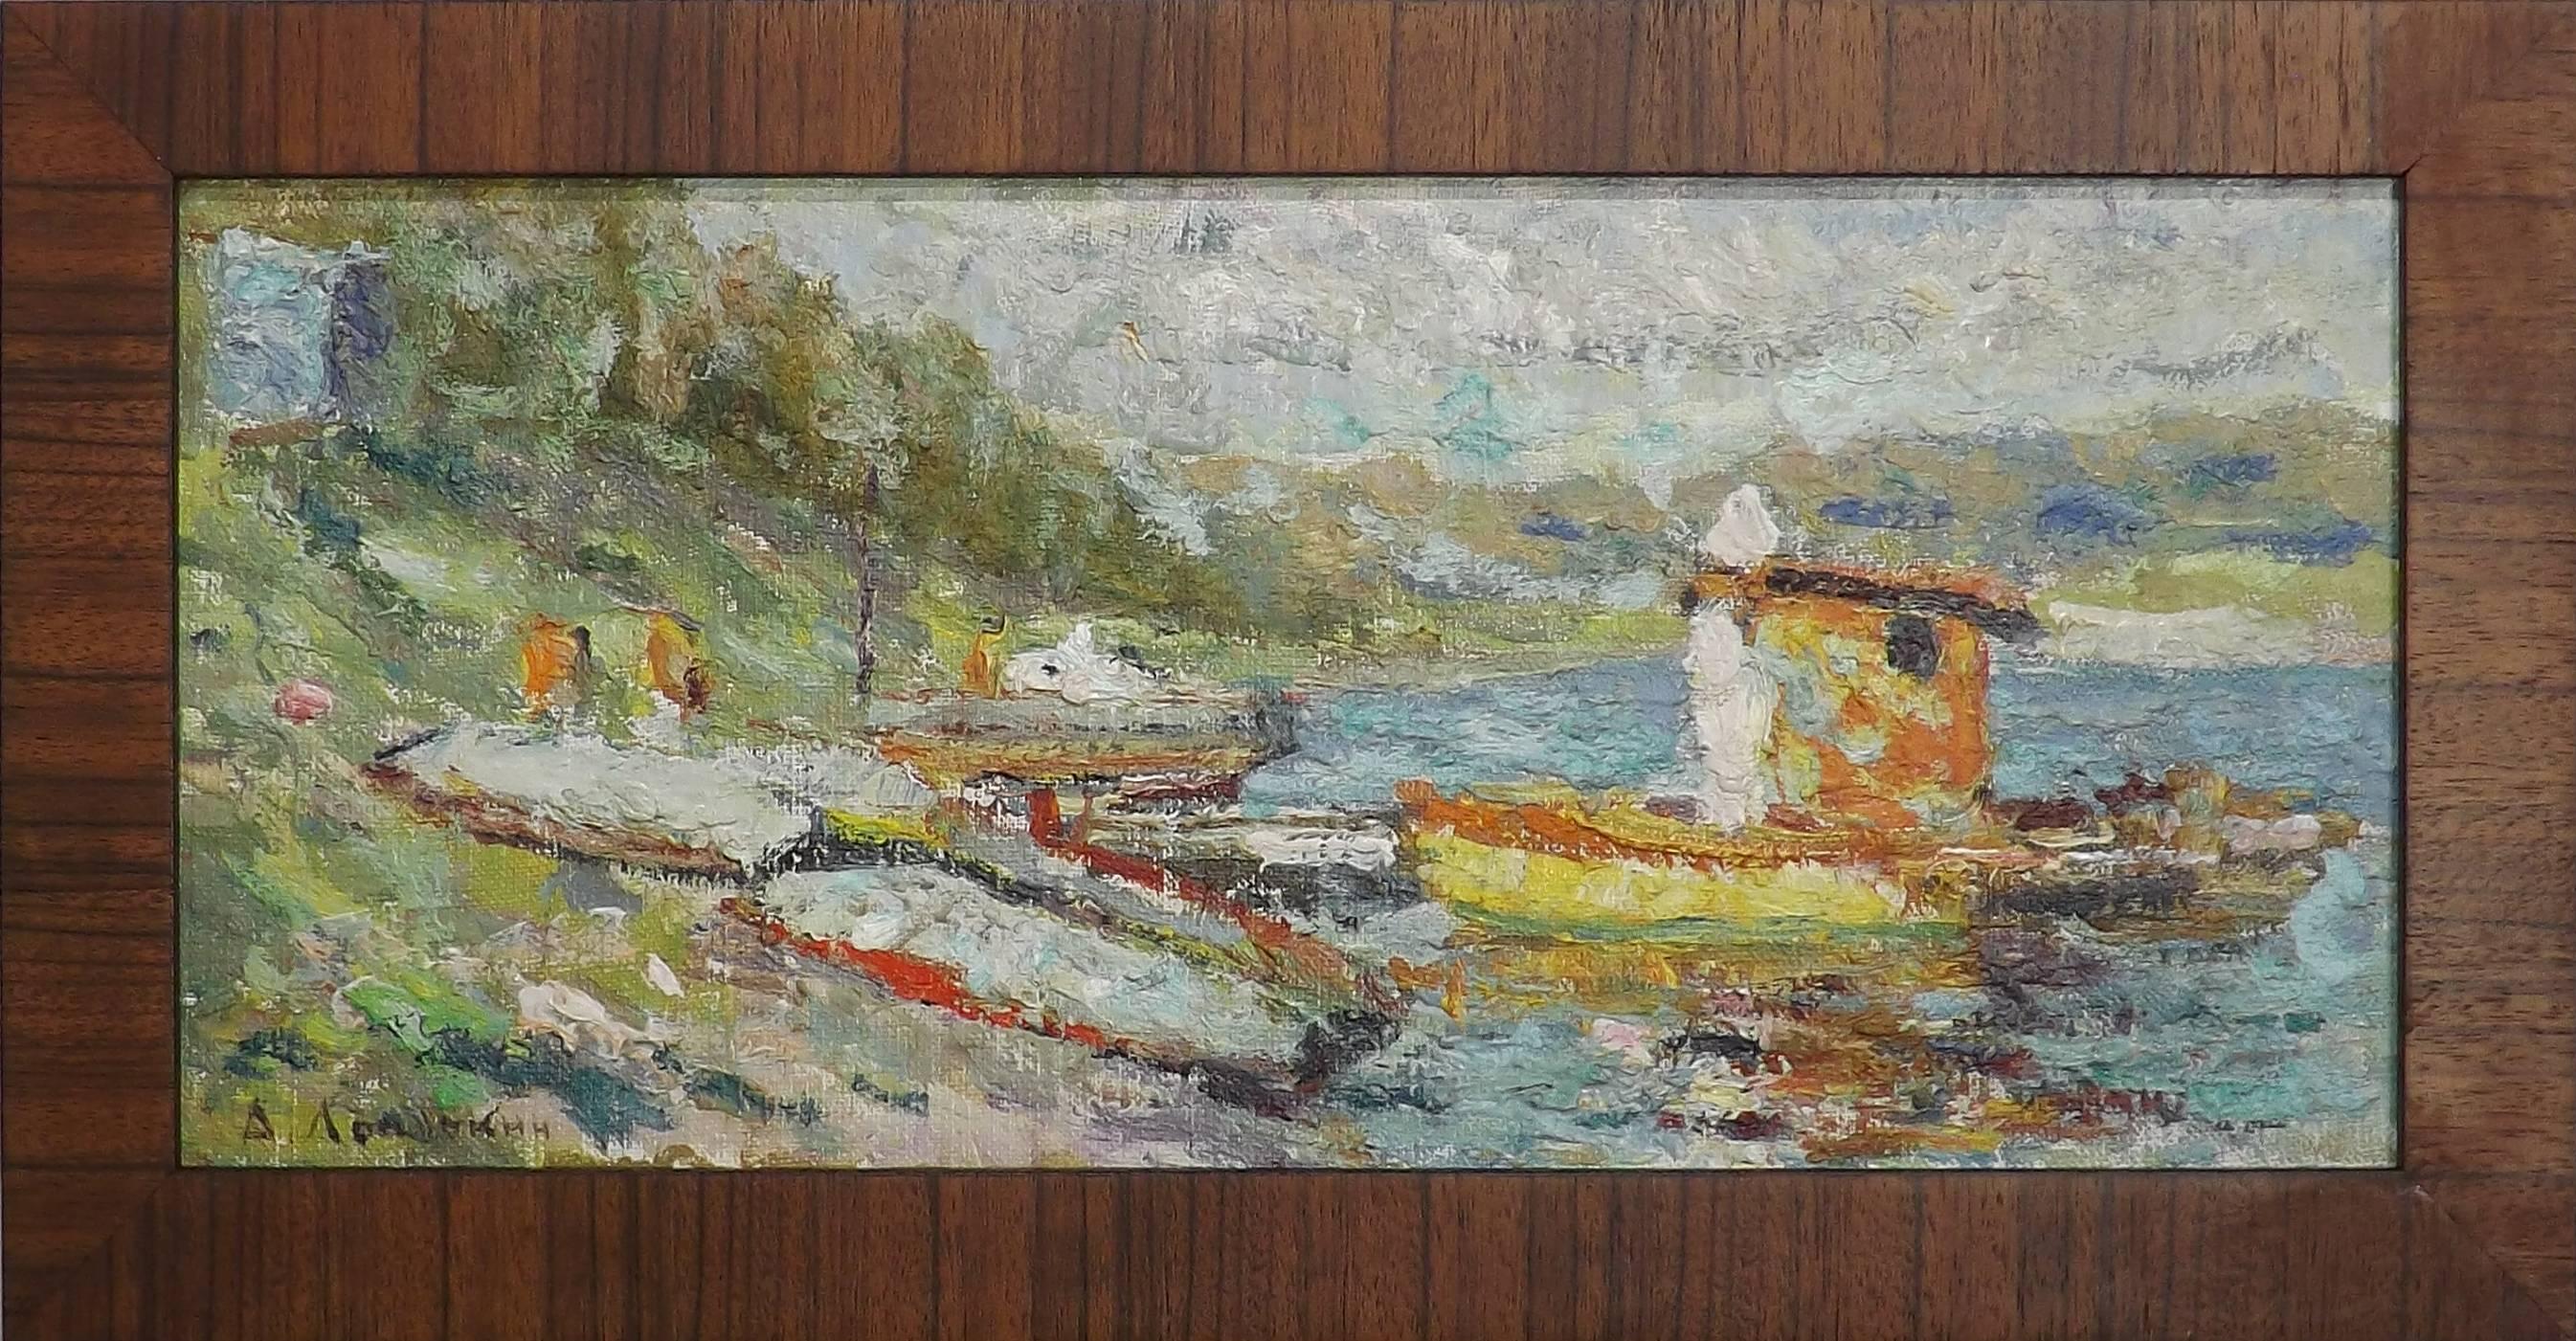 A colorful example of Soviet era painting by acclaimed Russian artist Vladimir Lopatkin. Small boats have been pulled ashore while a small tug boat sits in the water nearby. By the threatening clouds it appears to be the end of the boating season